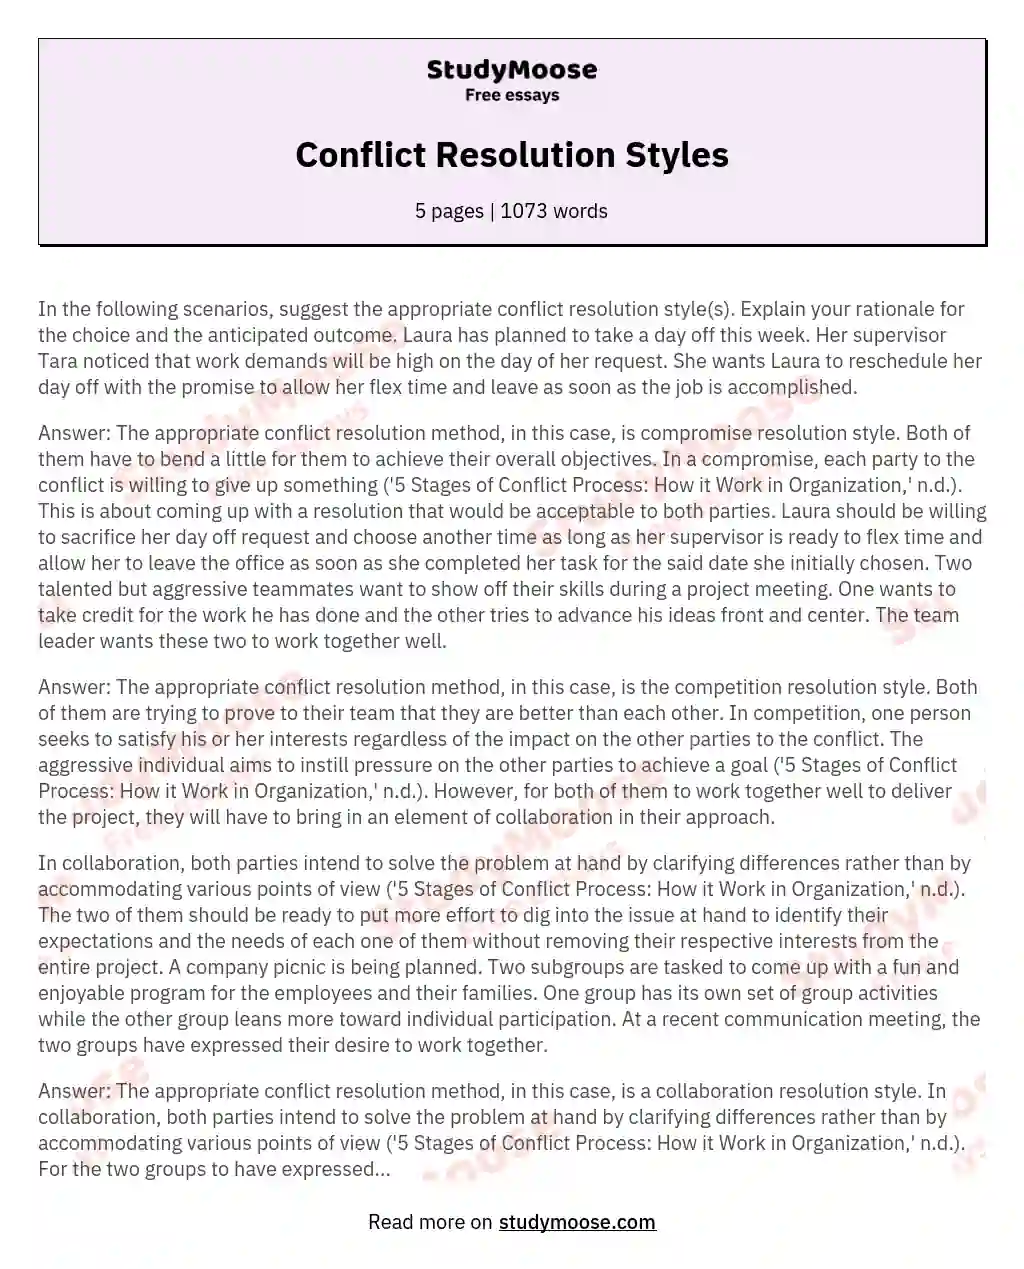 Conflict Resolution Styles